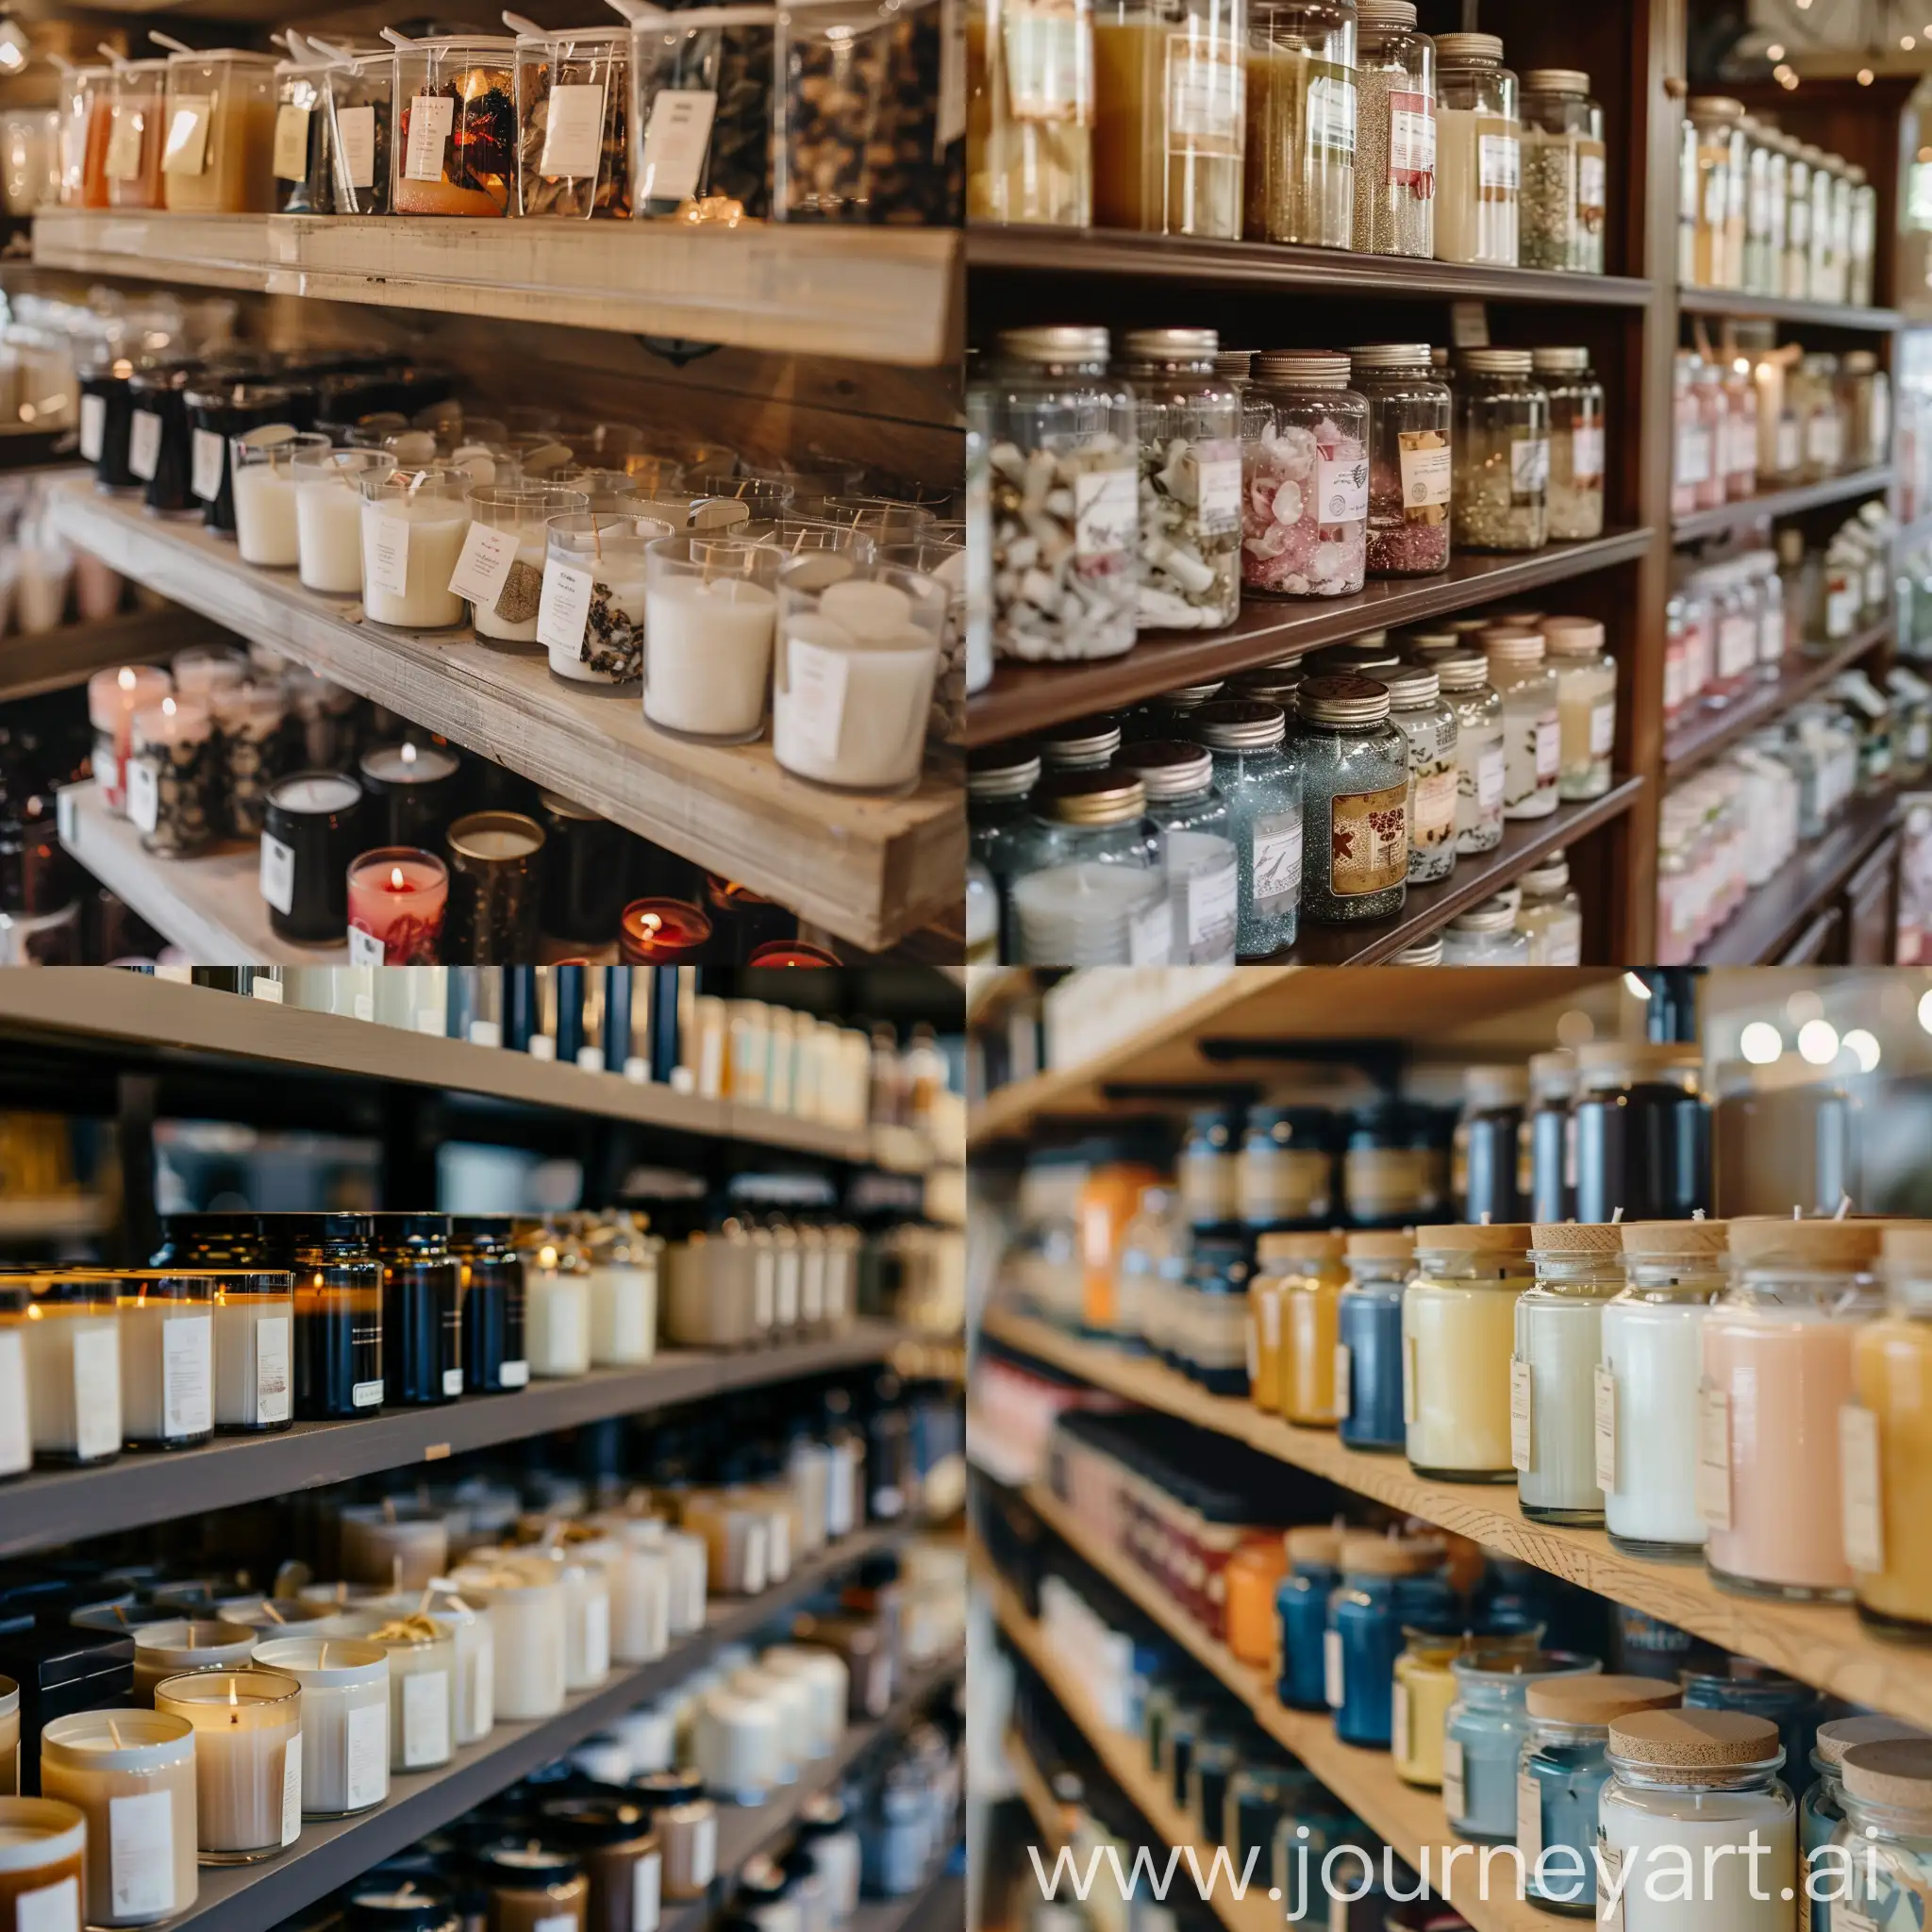 A shelf in a candle store, displaying an assortment of unlit candles for sale.